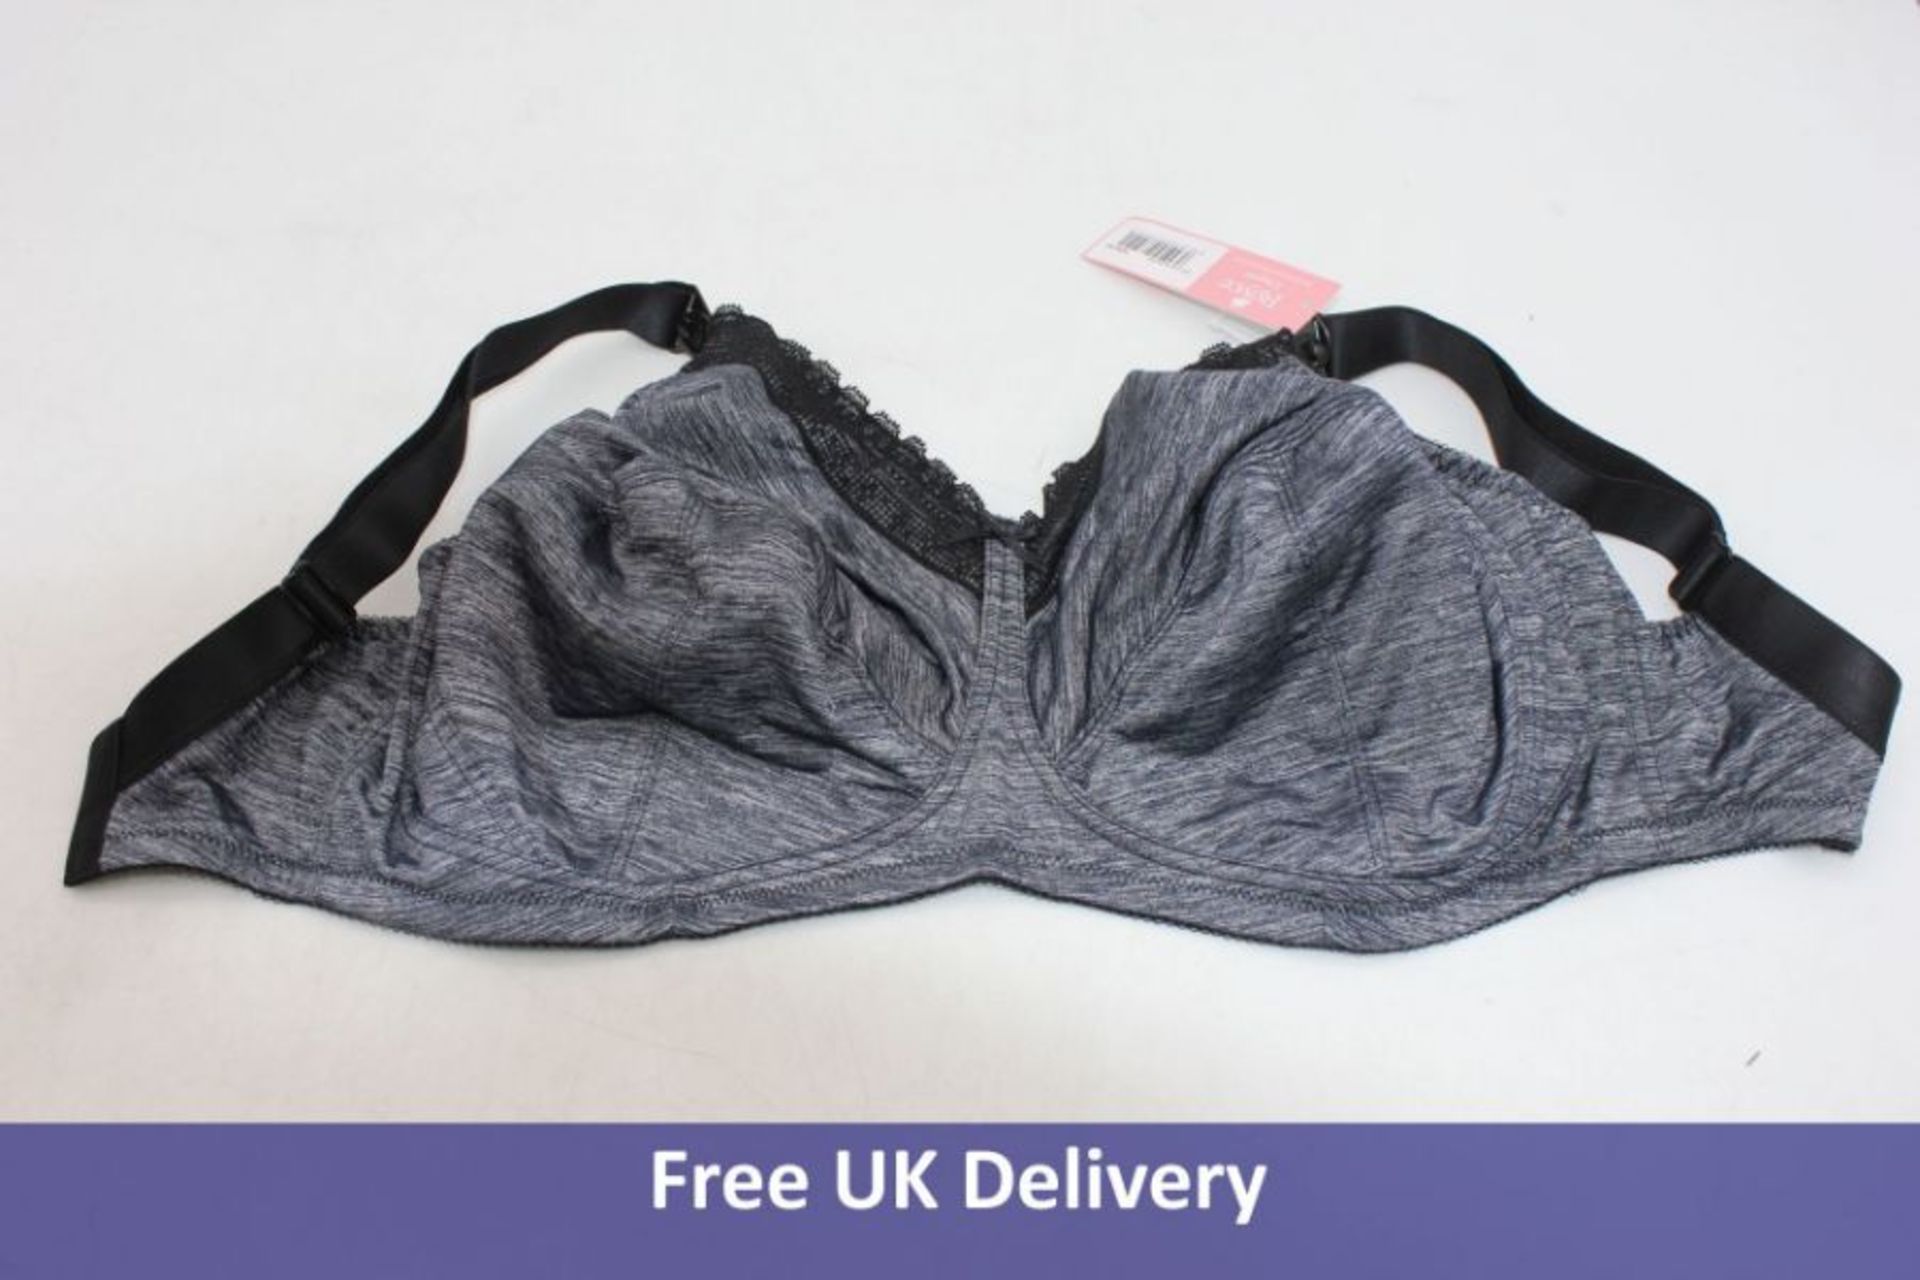 Three Royce Lingerie Luna Nursing Bras, Grey, Sizes 73/32H, 75/34HH, 85/38H, New With Tags In Bags